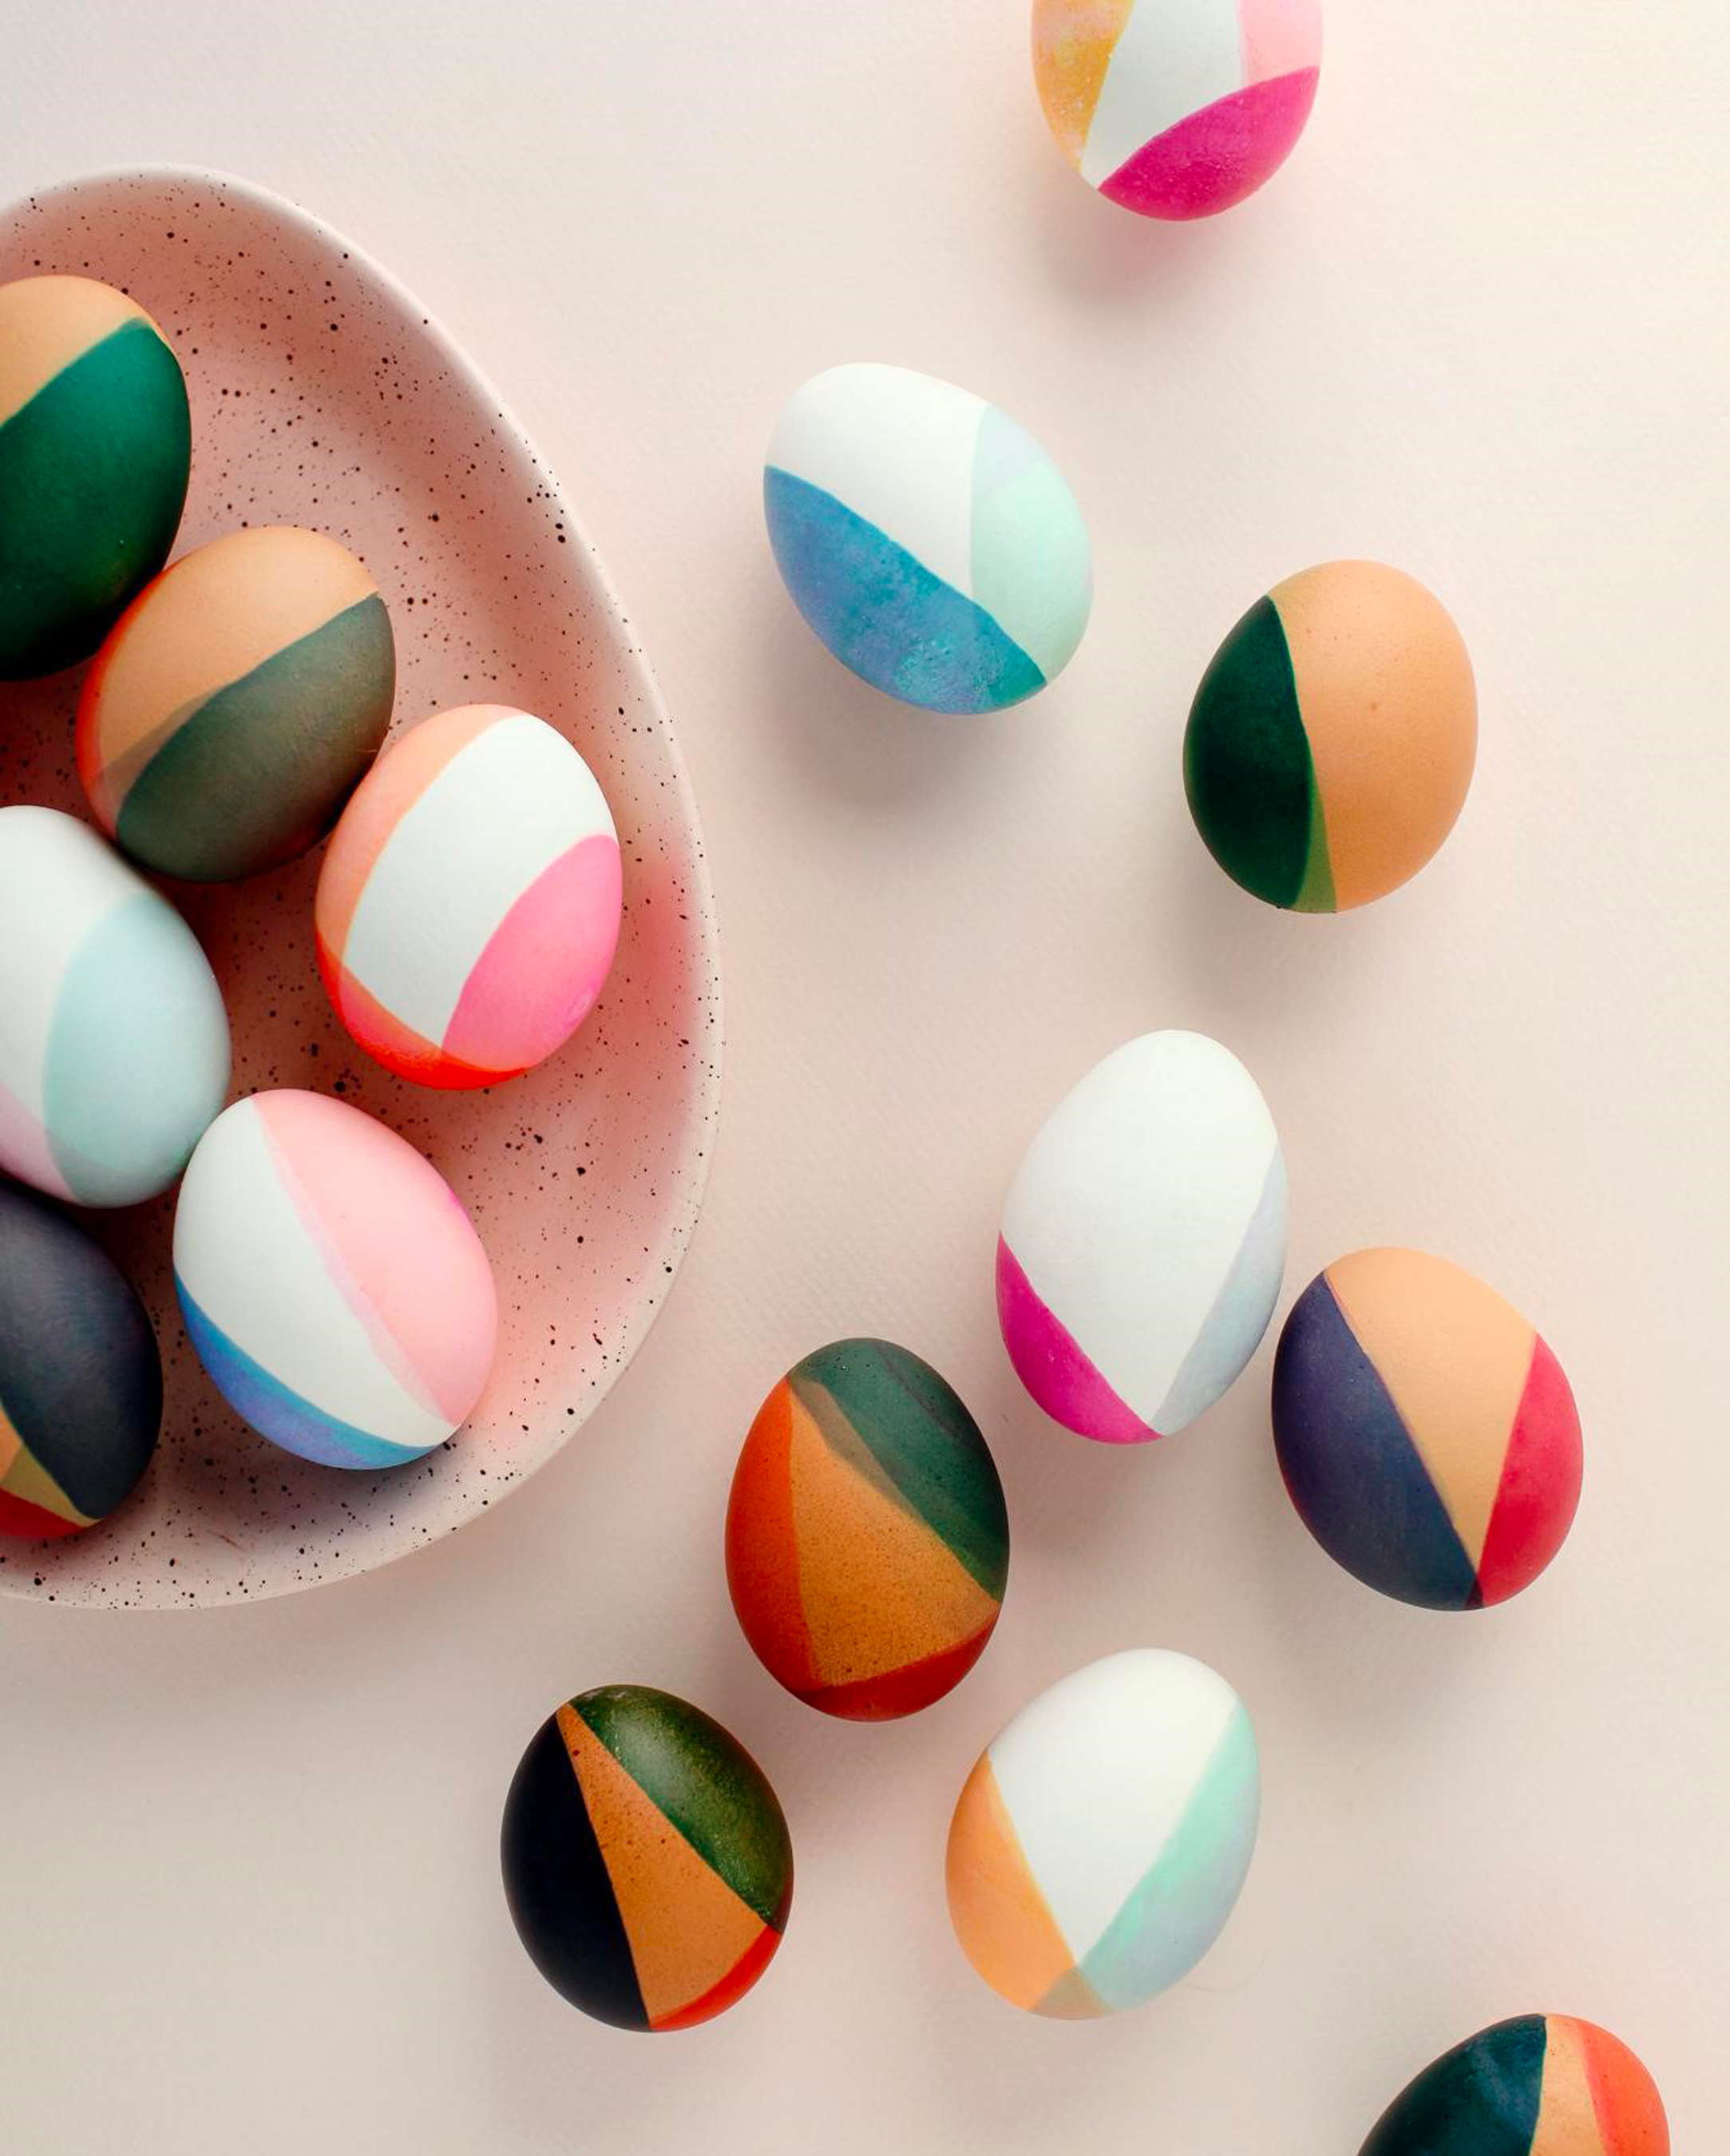 The Incredible Egg Reveals How to Celebrate Easter In Your